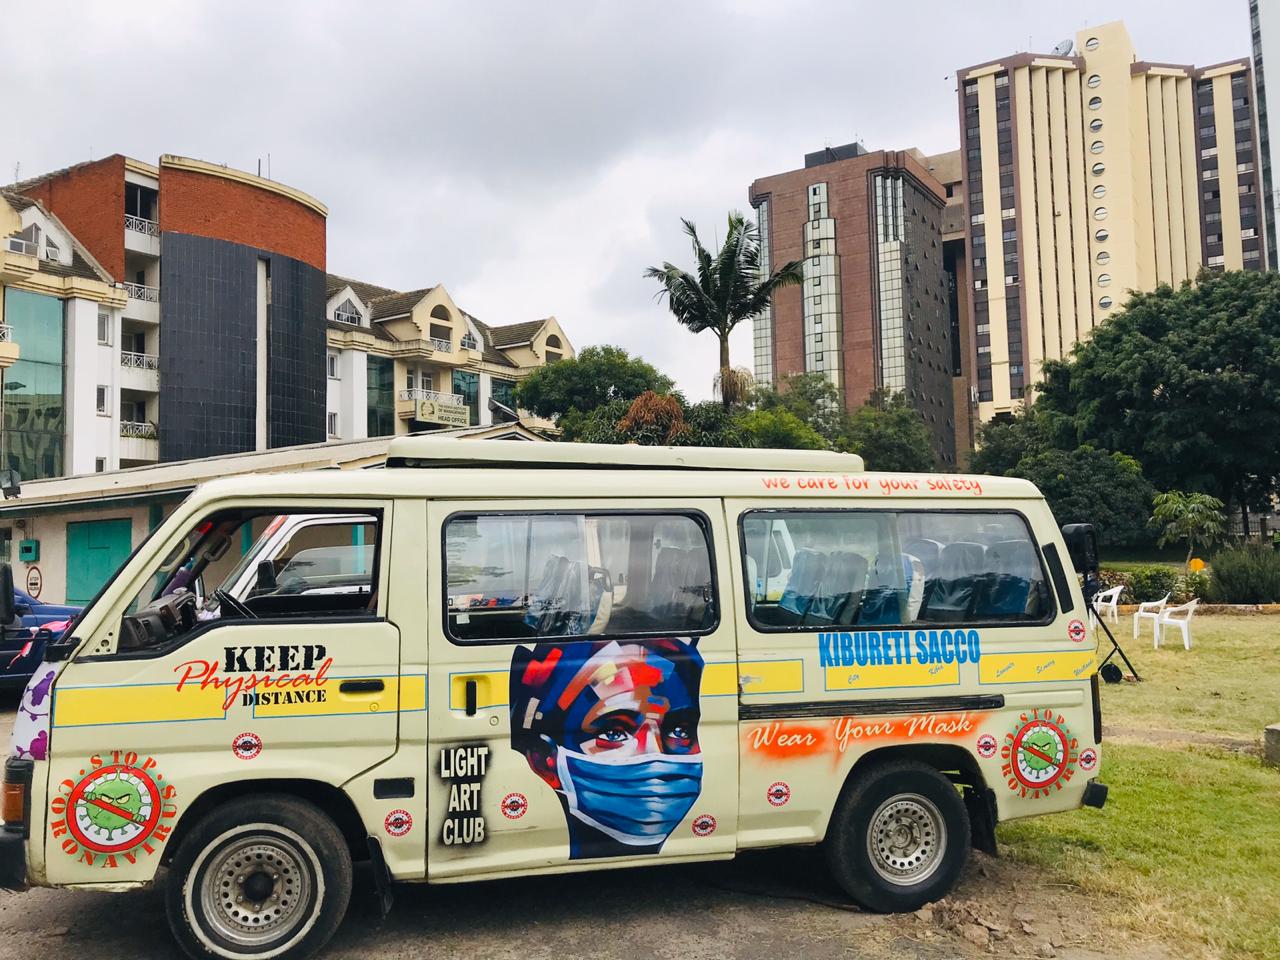 One of the Kenyan public minivans or matatus spray painted with COVID-19 prevention messages as part of a UN-Habitat initiative